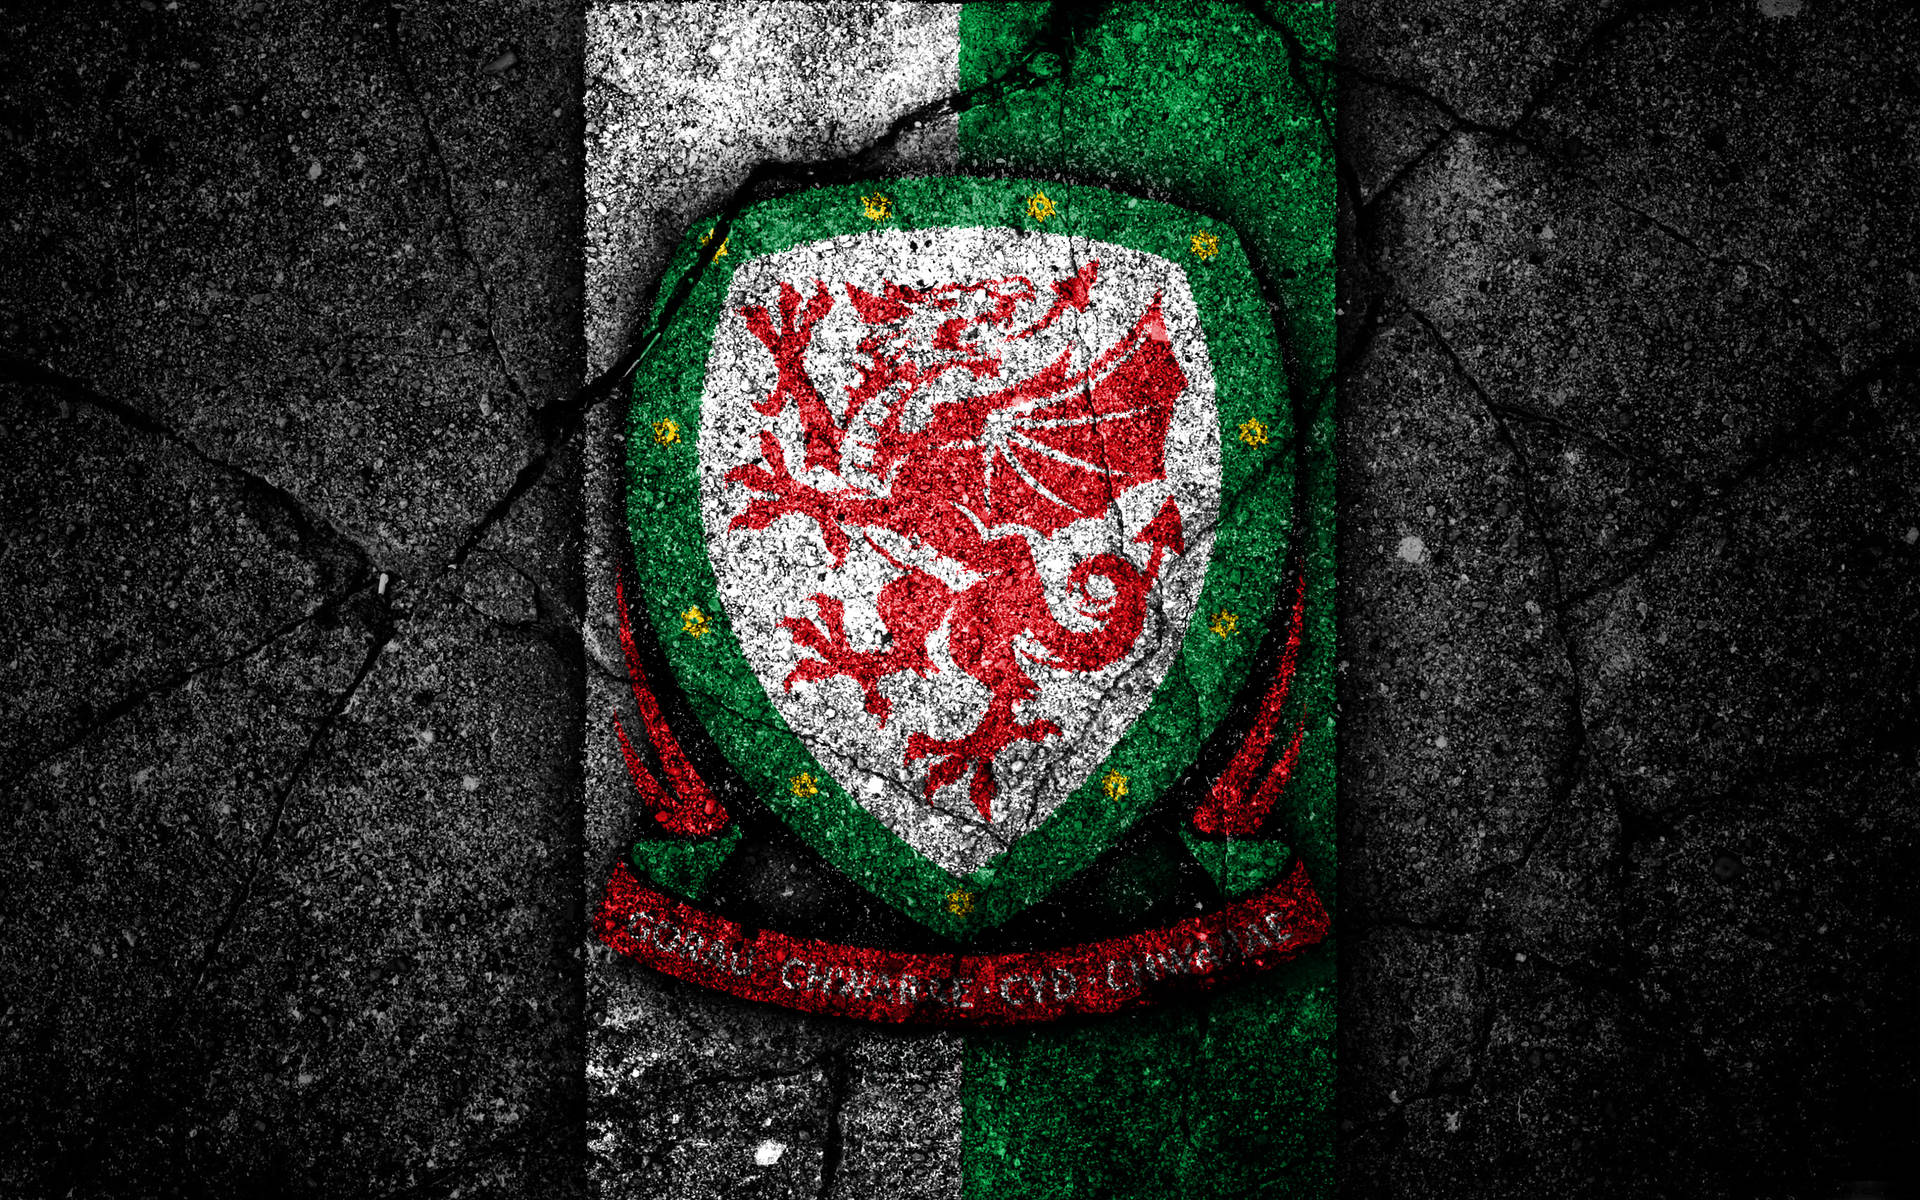 Wales National Football Team Logo On Cracked Pavement Wallpaper